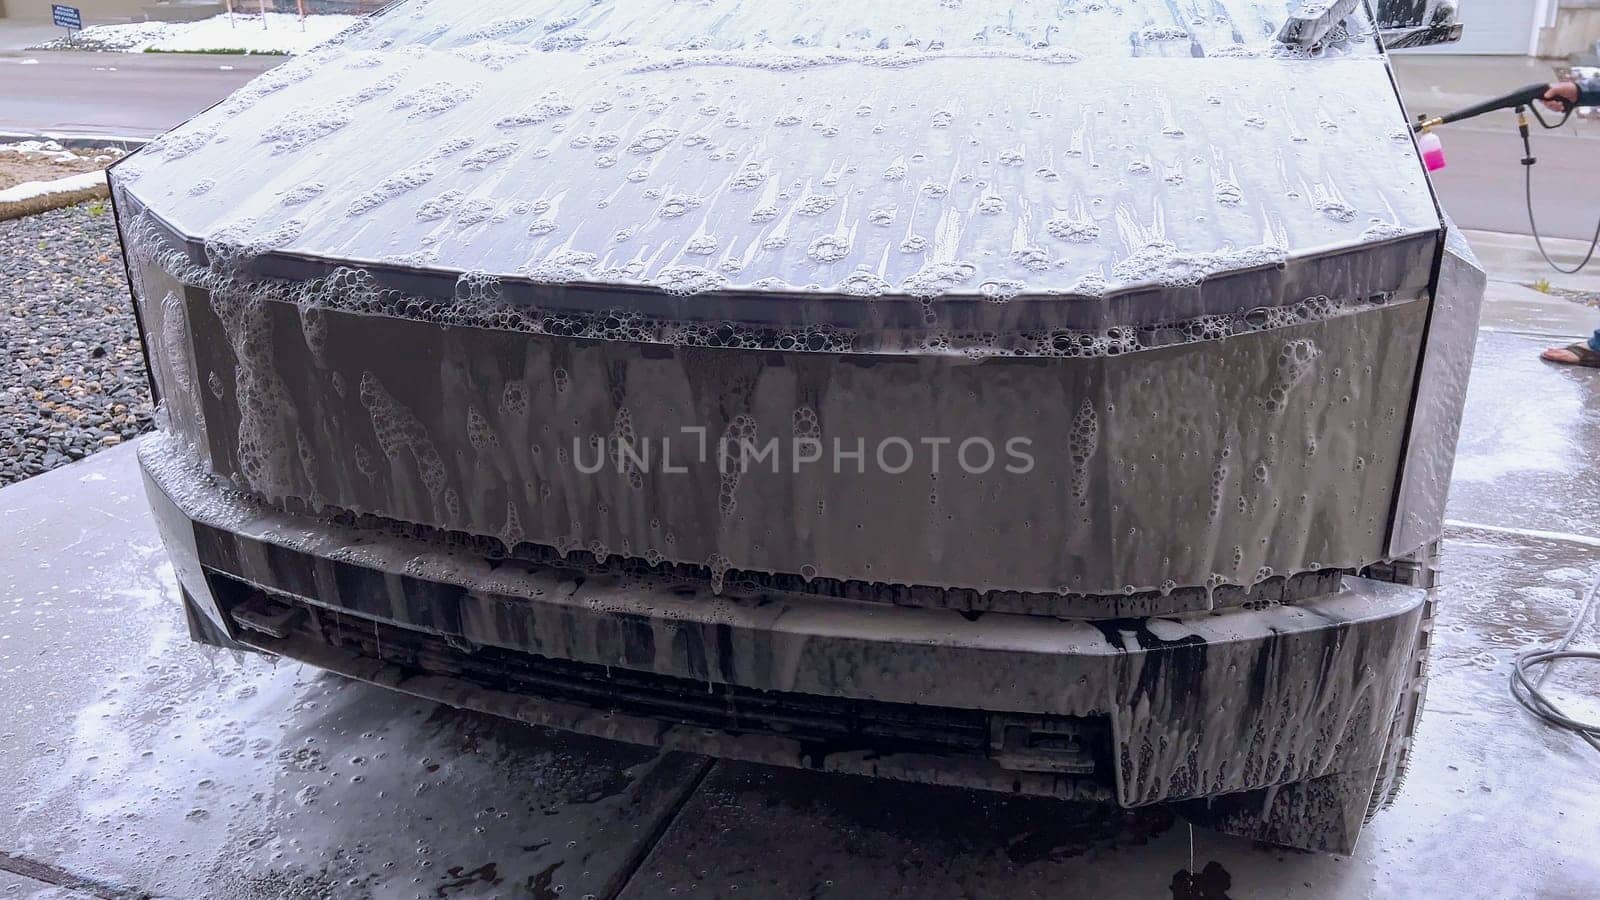 Washing a Tesla Cybertruck: Suds Covering Its Futuristic Exterior by arinahabich